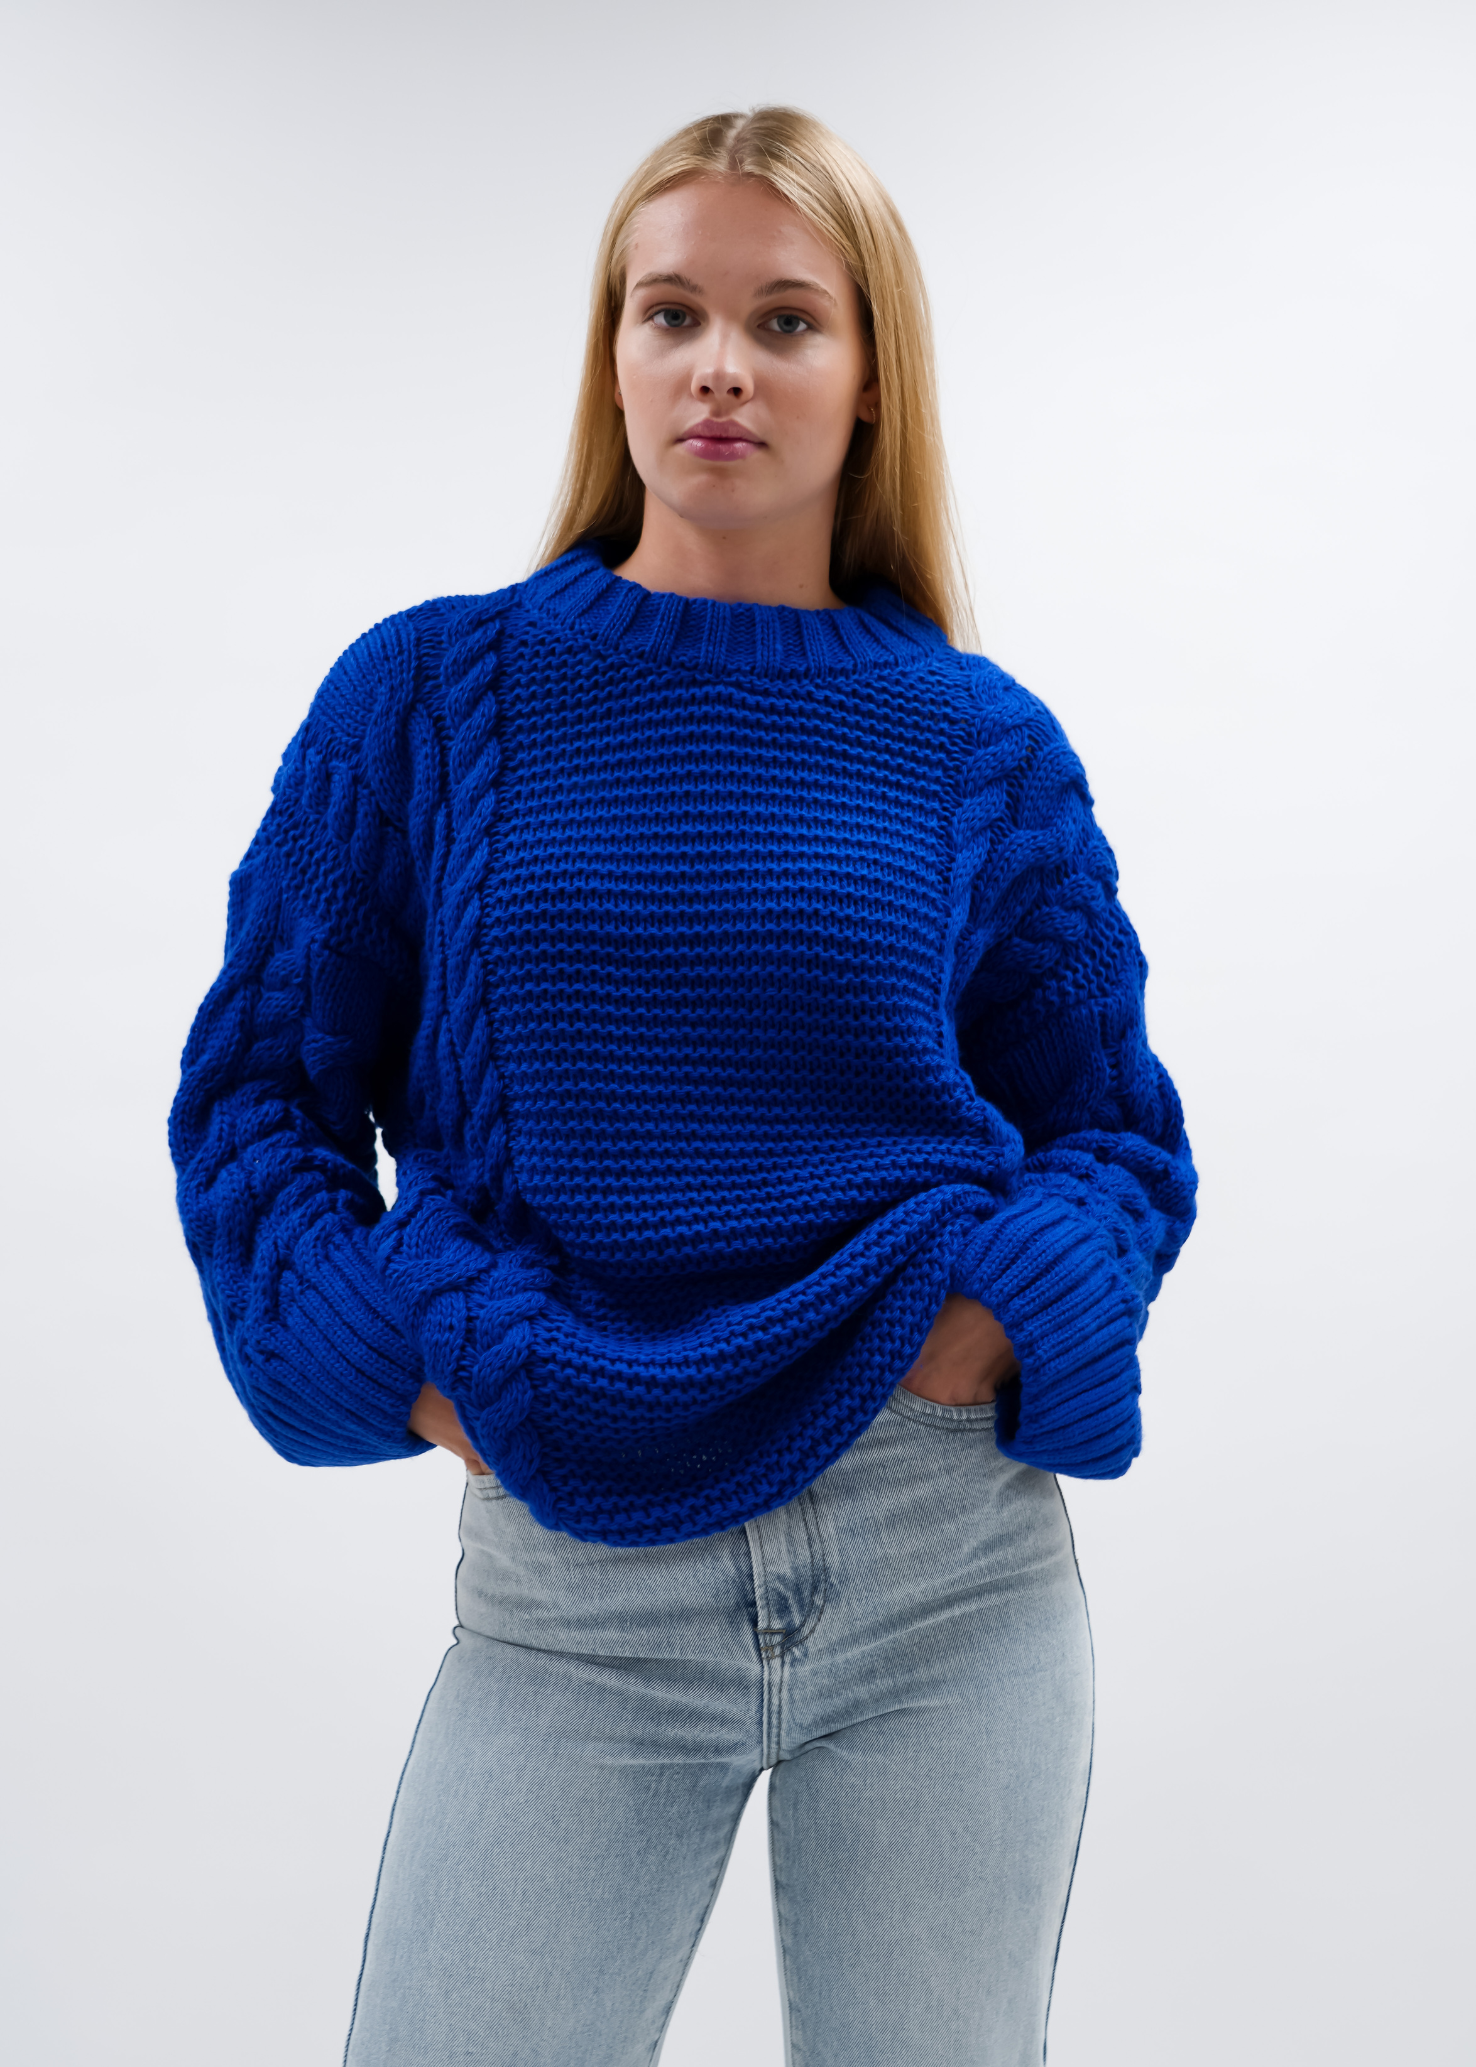 Cable knit electric blue